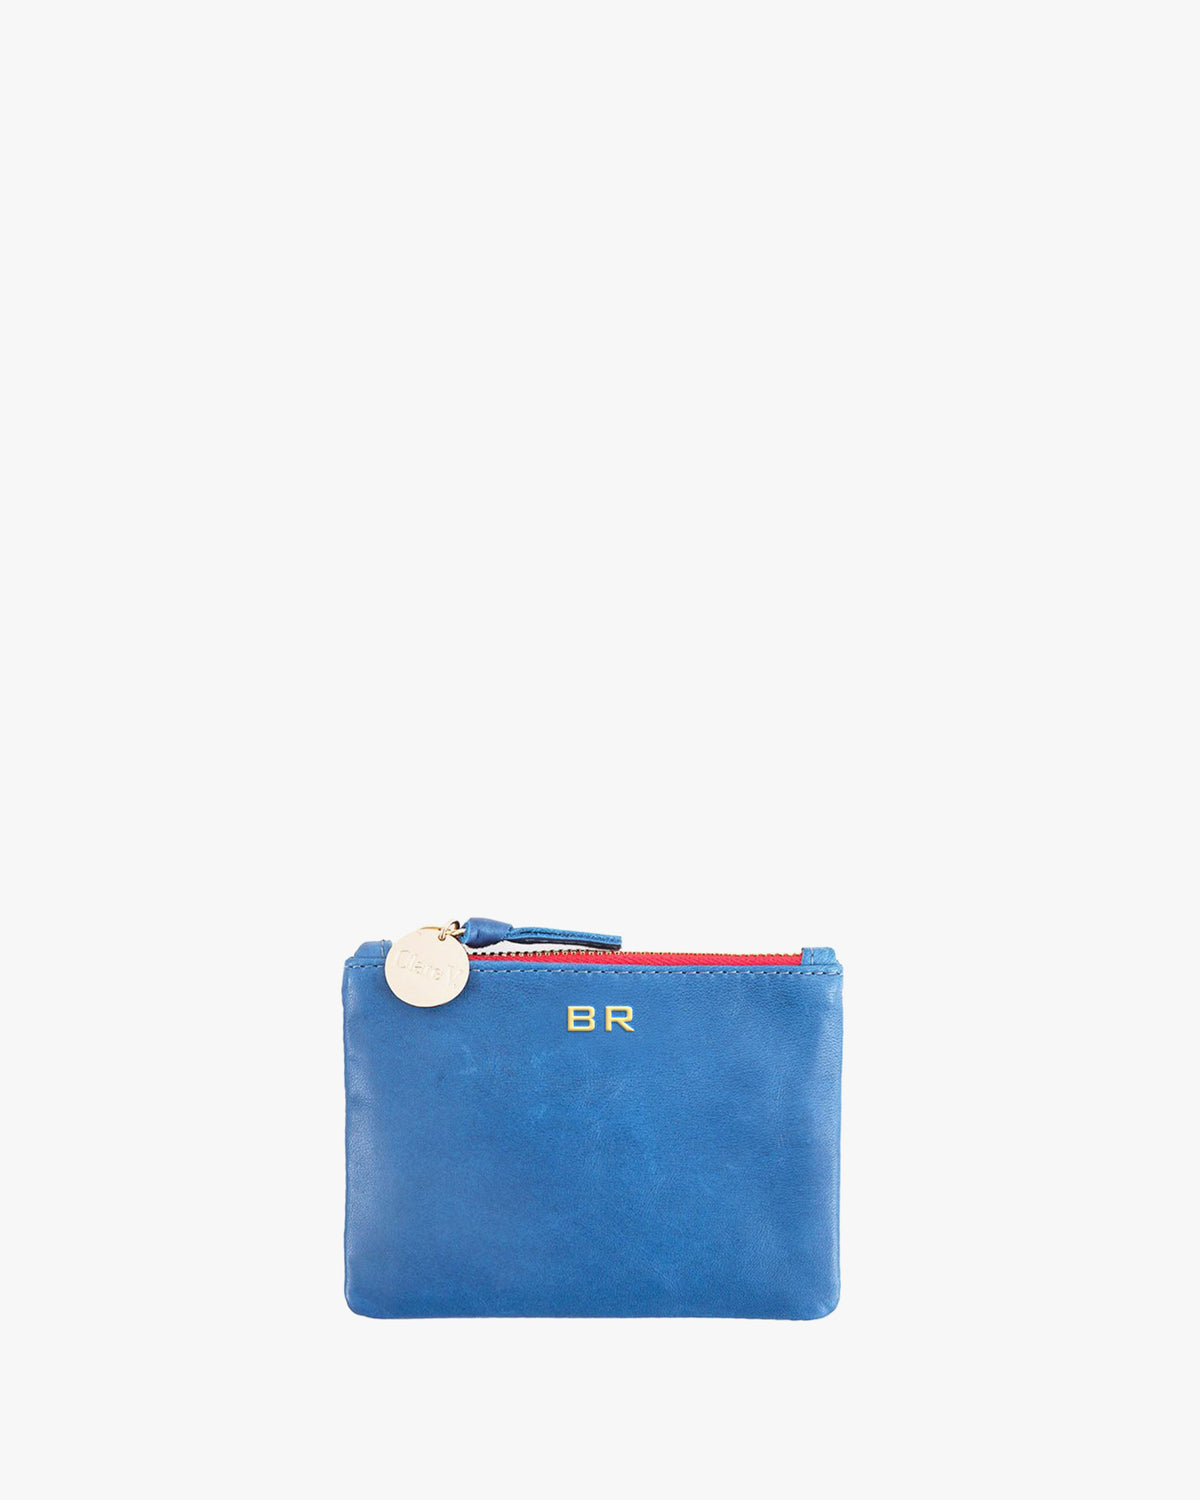 Cobalt Coin Clutch with BR Gold Foil Monogram On The Top Center in Short Letters